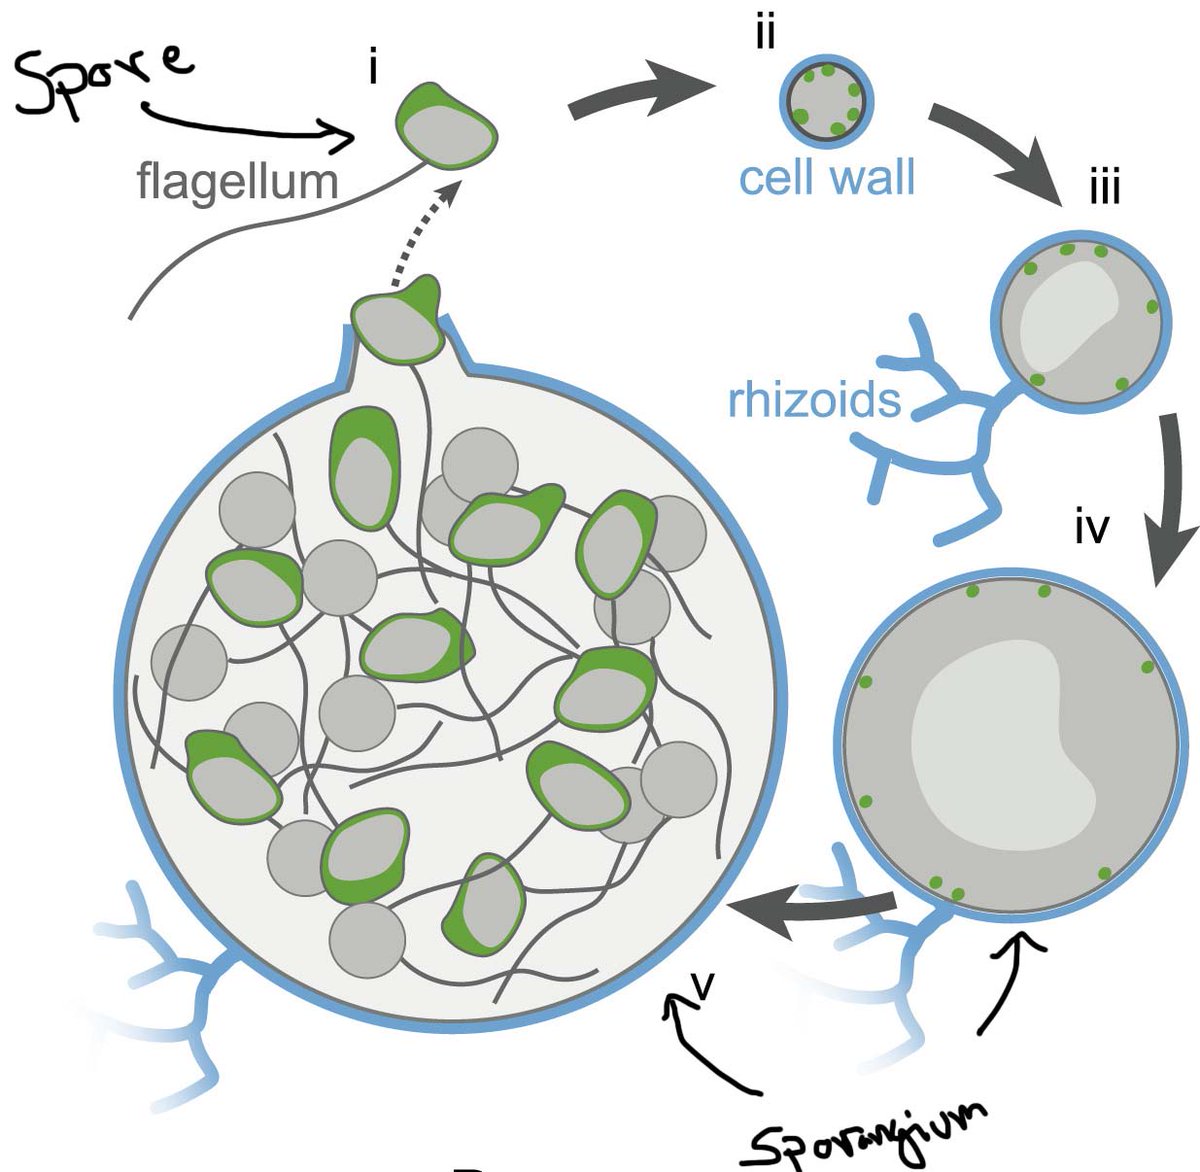 But chytrids don’t look like the fungus you’re probably used to seeing. They have a bi-phasic lifecycle, spending time as a motile spore (sans cell wall) before settling down and becoming a sessile sporangium (w/ cell wall). In this stage they develop and release more zoospores.